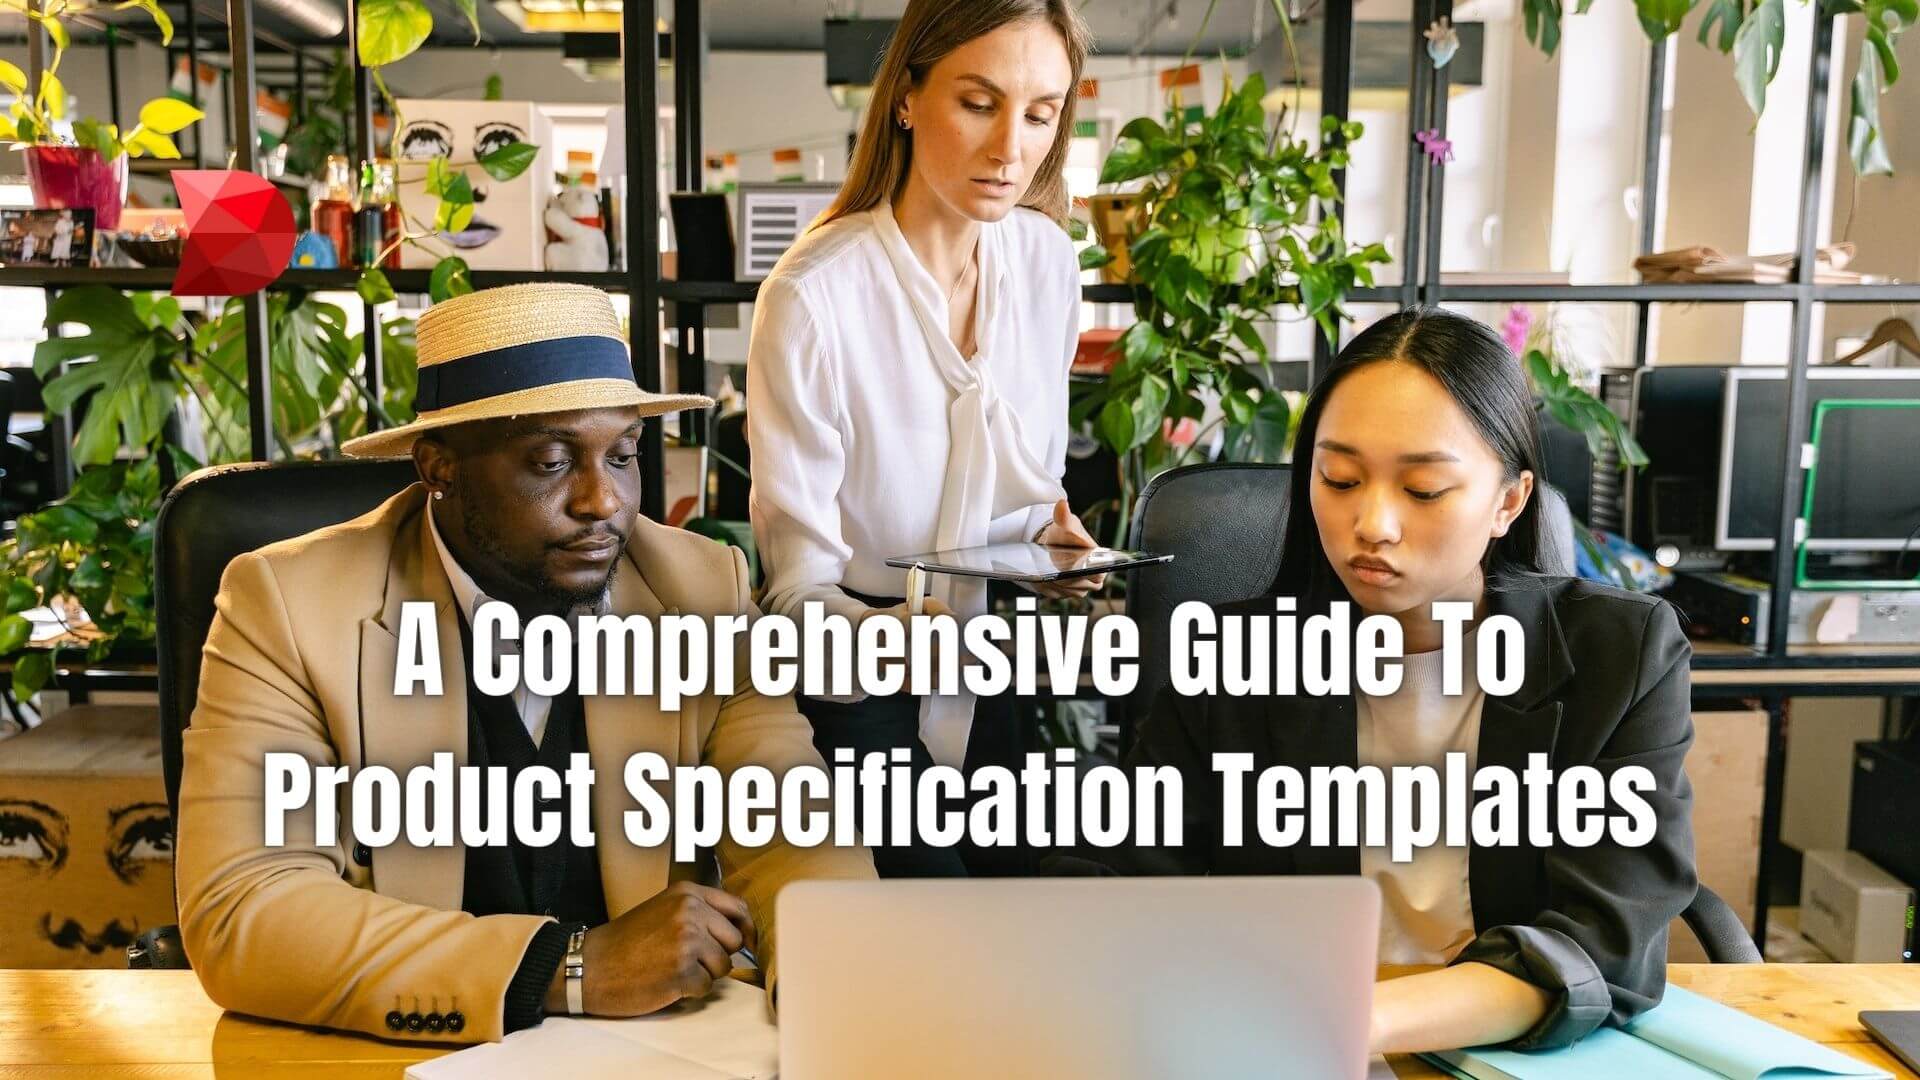 Product specification templates are a vital part of any product production process. Here's why it is essential for product development.